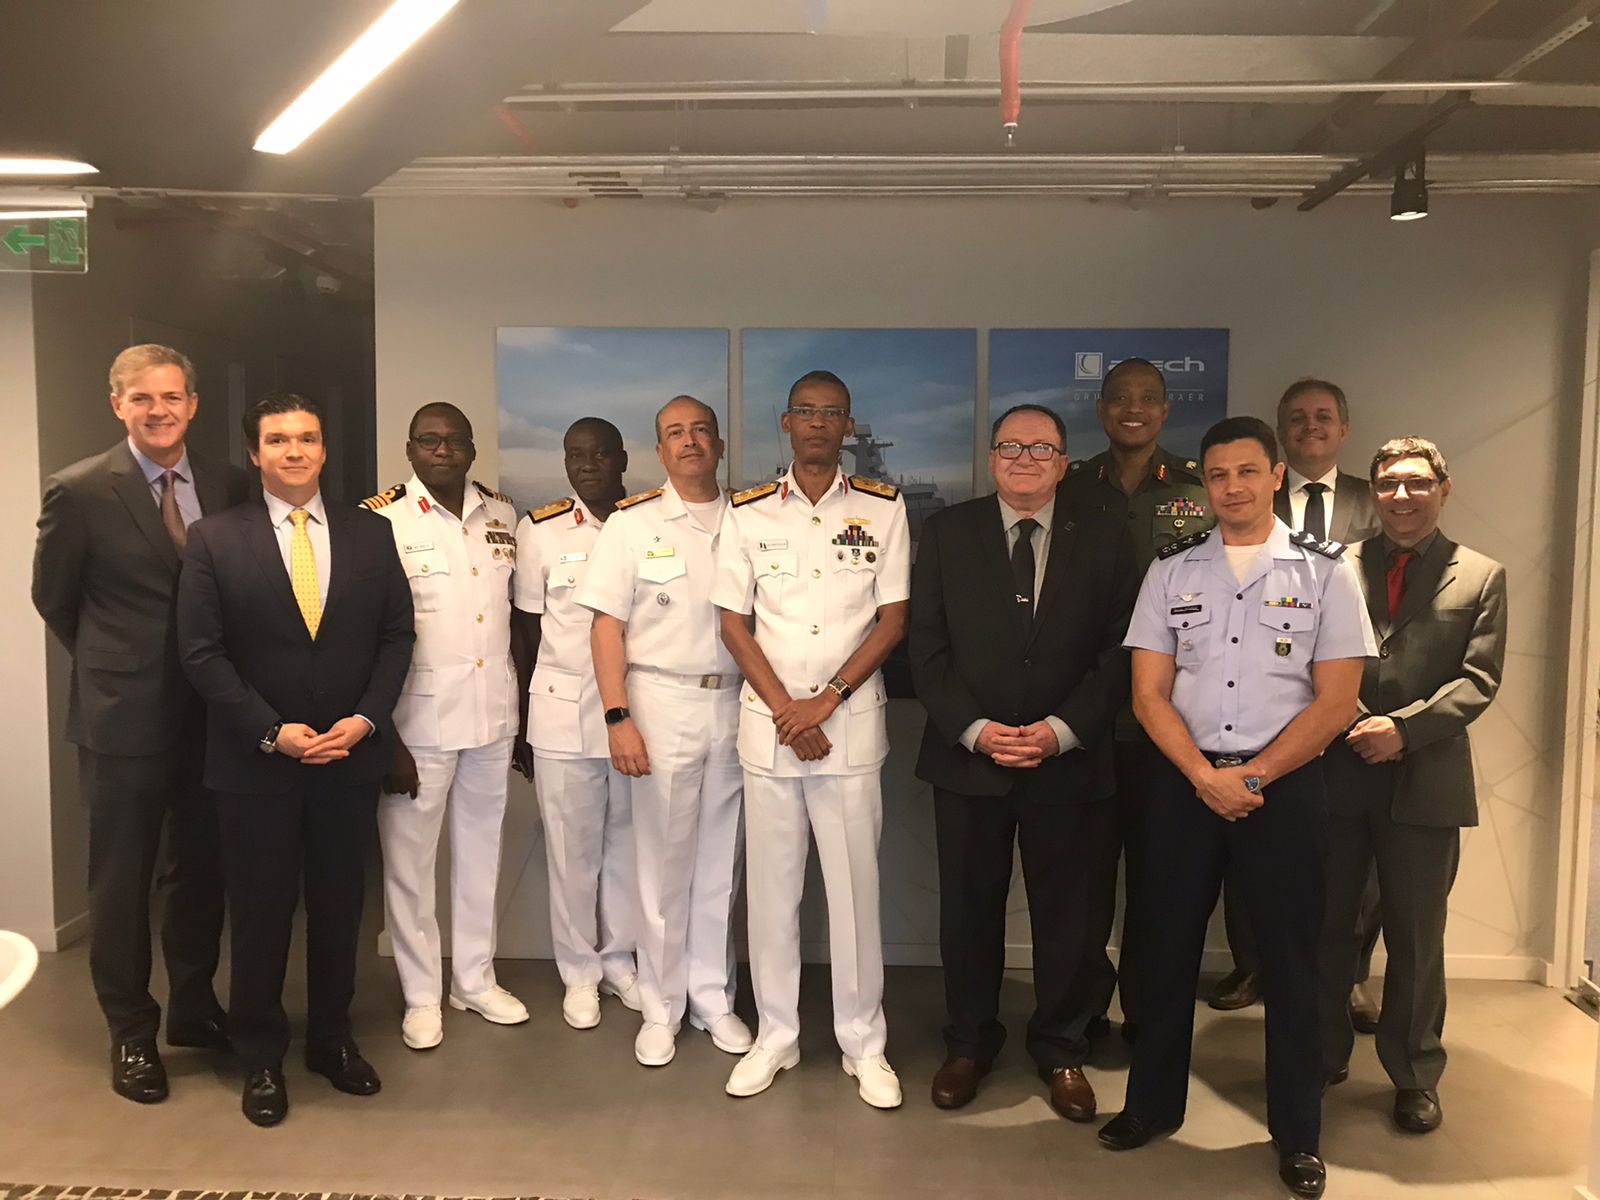 Atech receives a delegation from Nigeria and the Brazilian Ministry of Defense in Rio de Janeiro